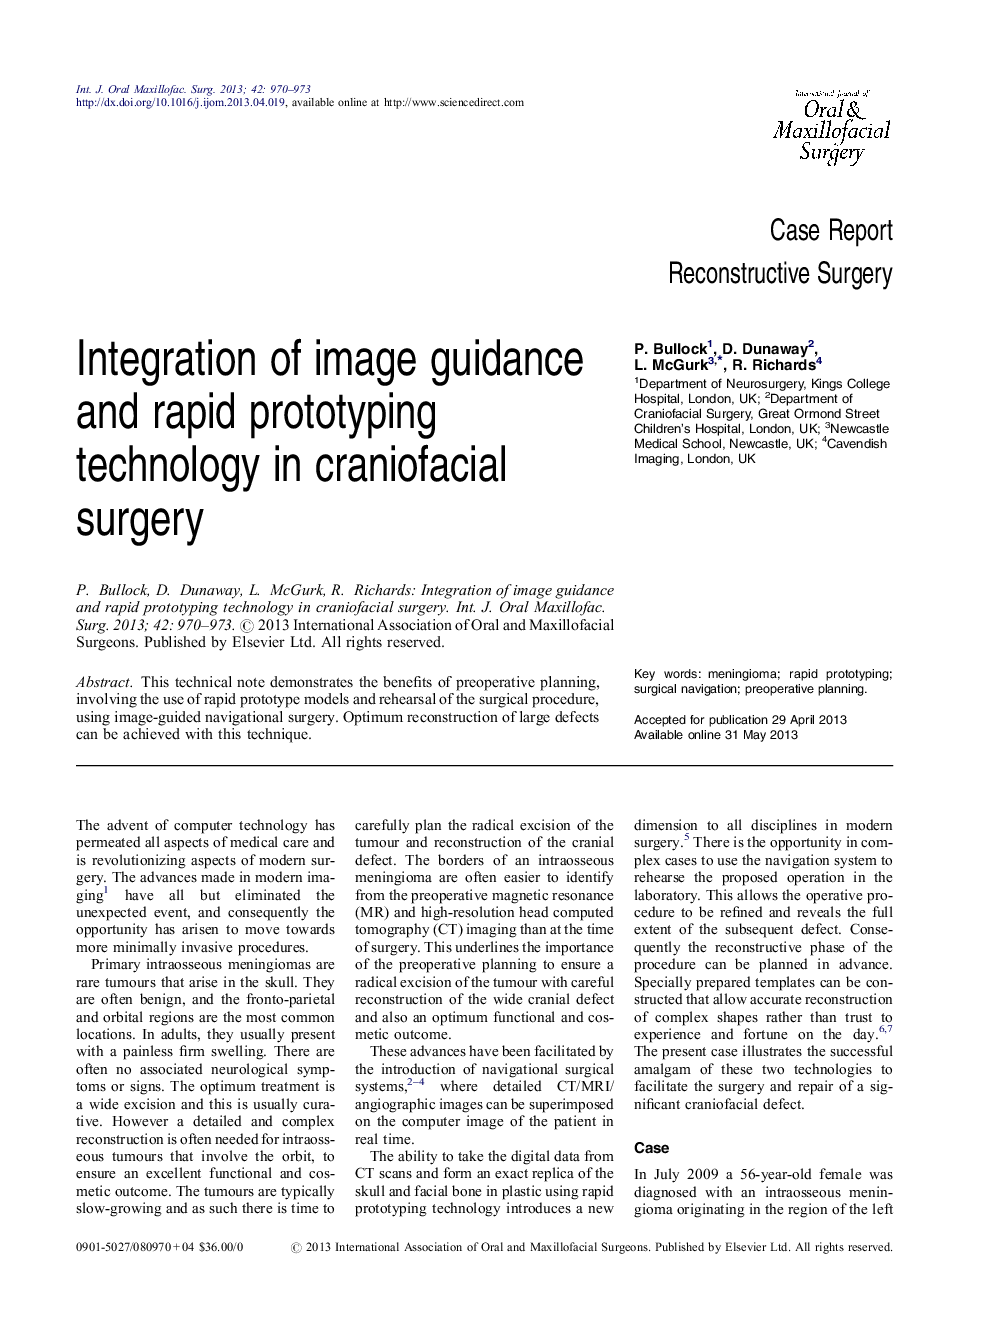 Integration of image guidance and rapid prototyping technology in craniofacial surgery